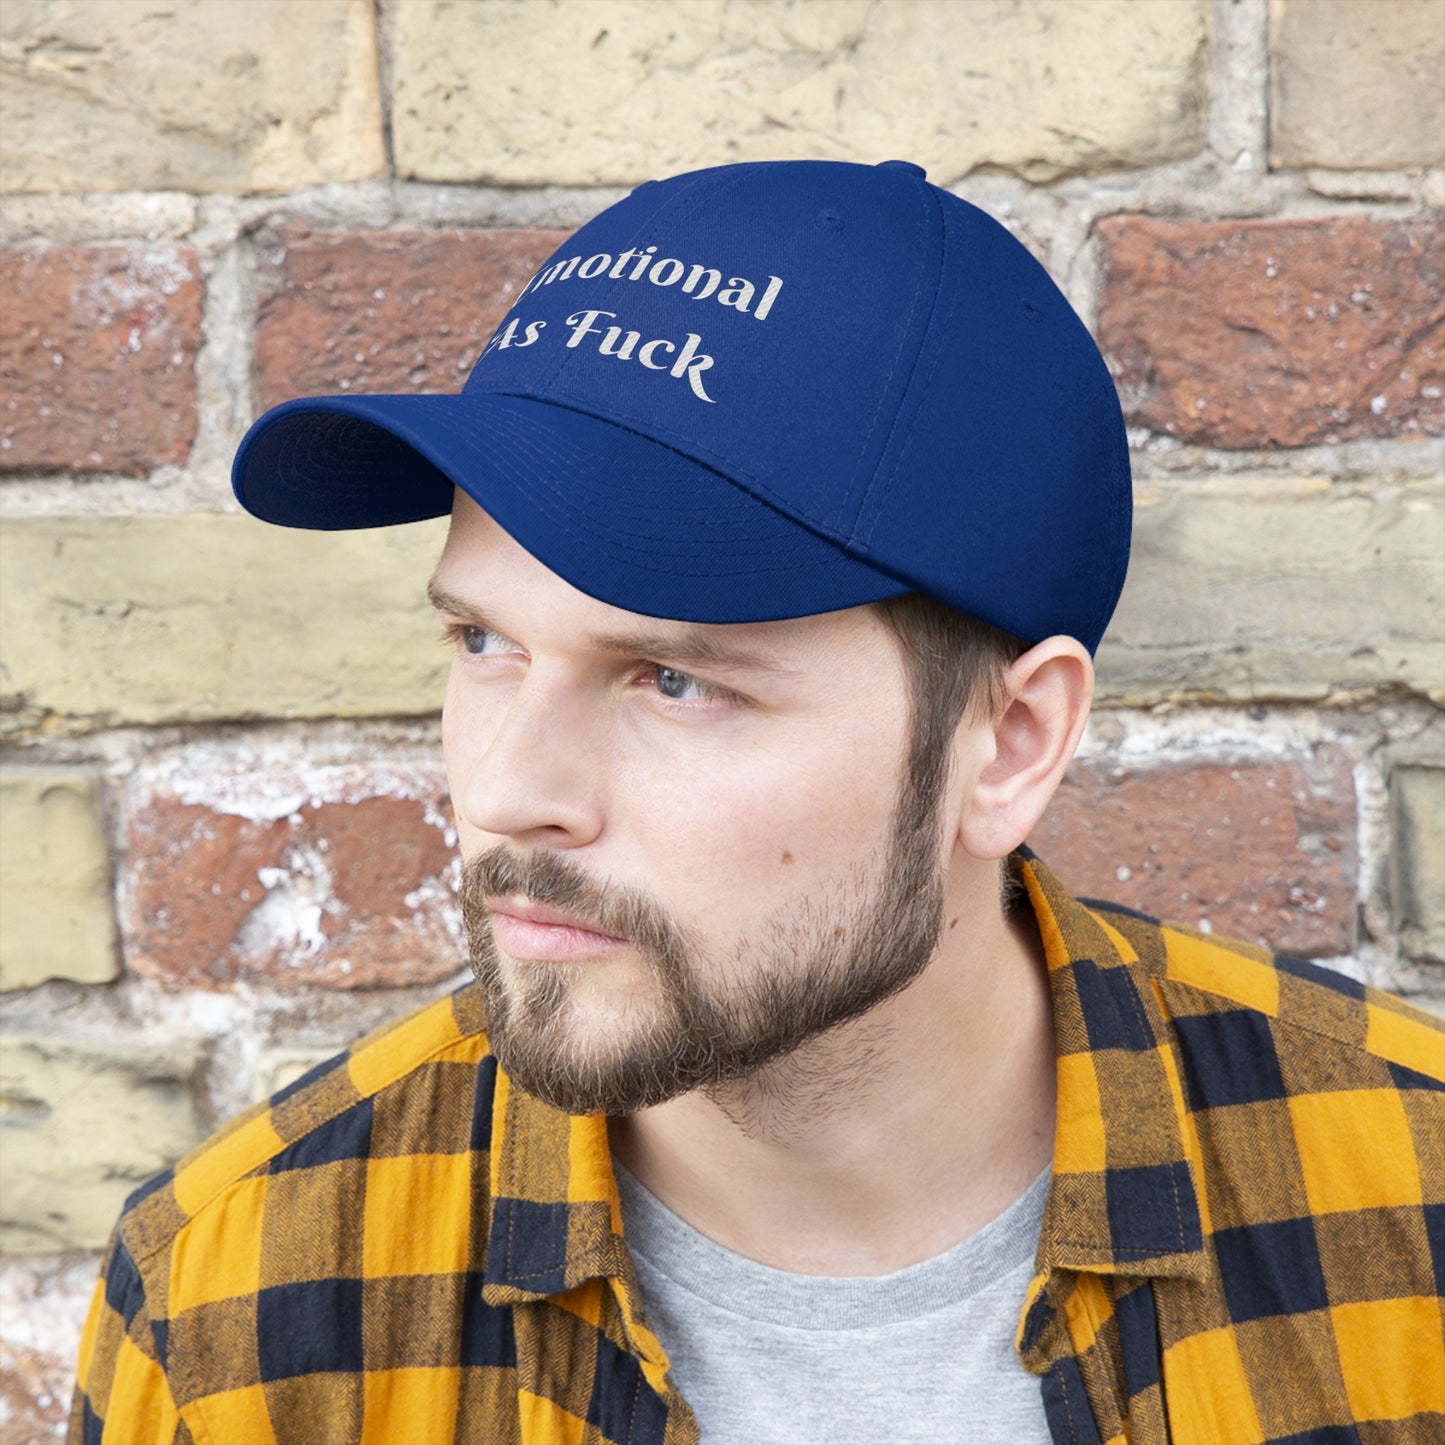 Emotional as Fuck Embroidered Hat for Authentic Expression